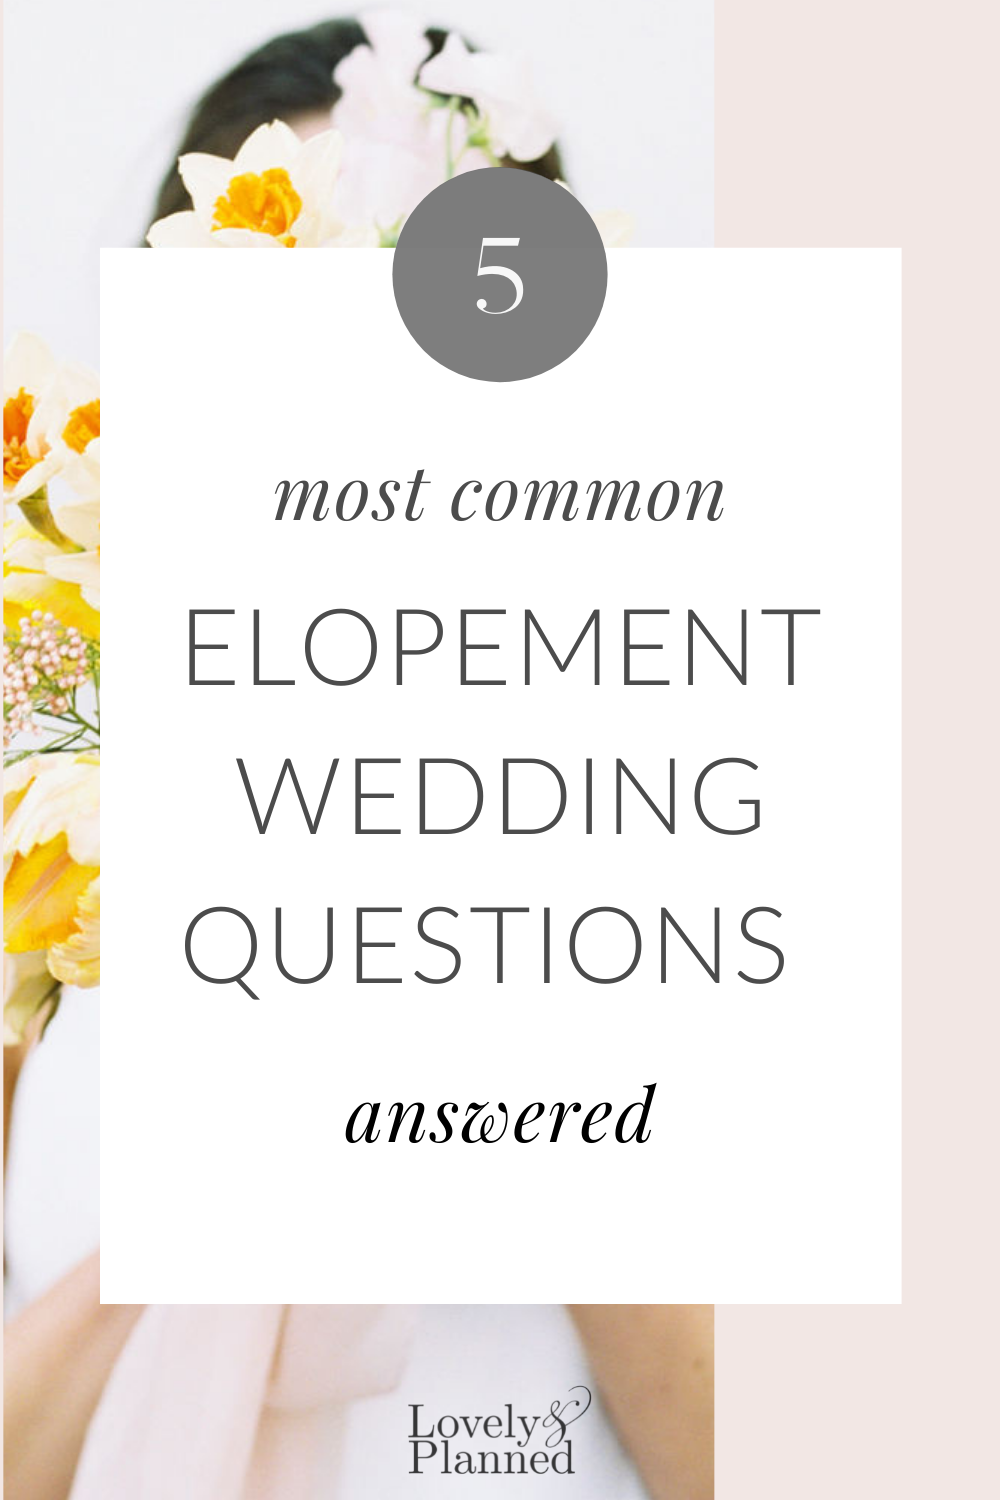 Top 5 Elopement Questions Answered - Lovely & Planned